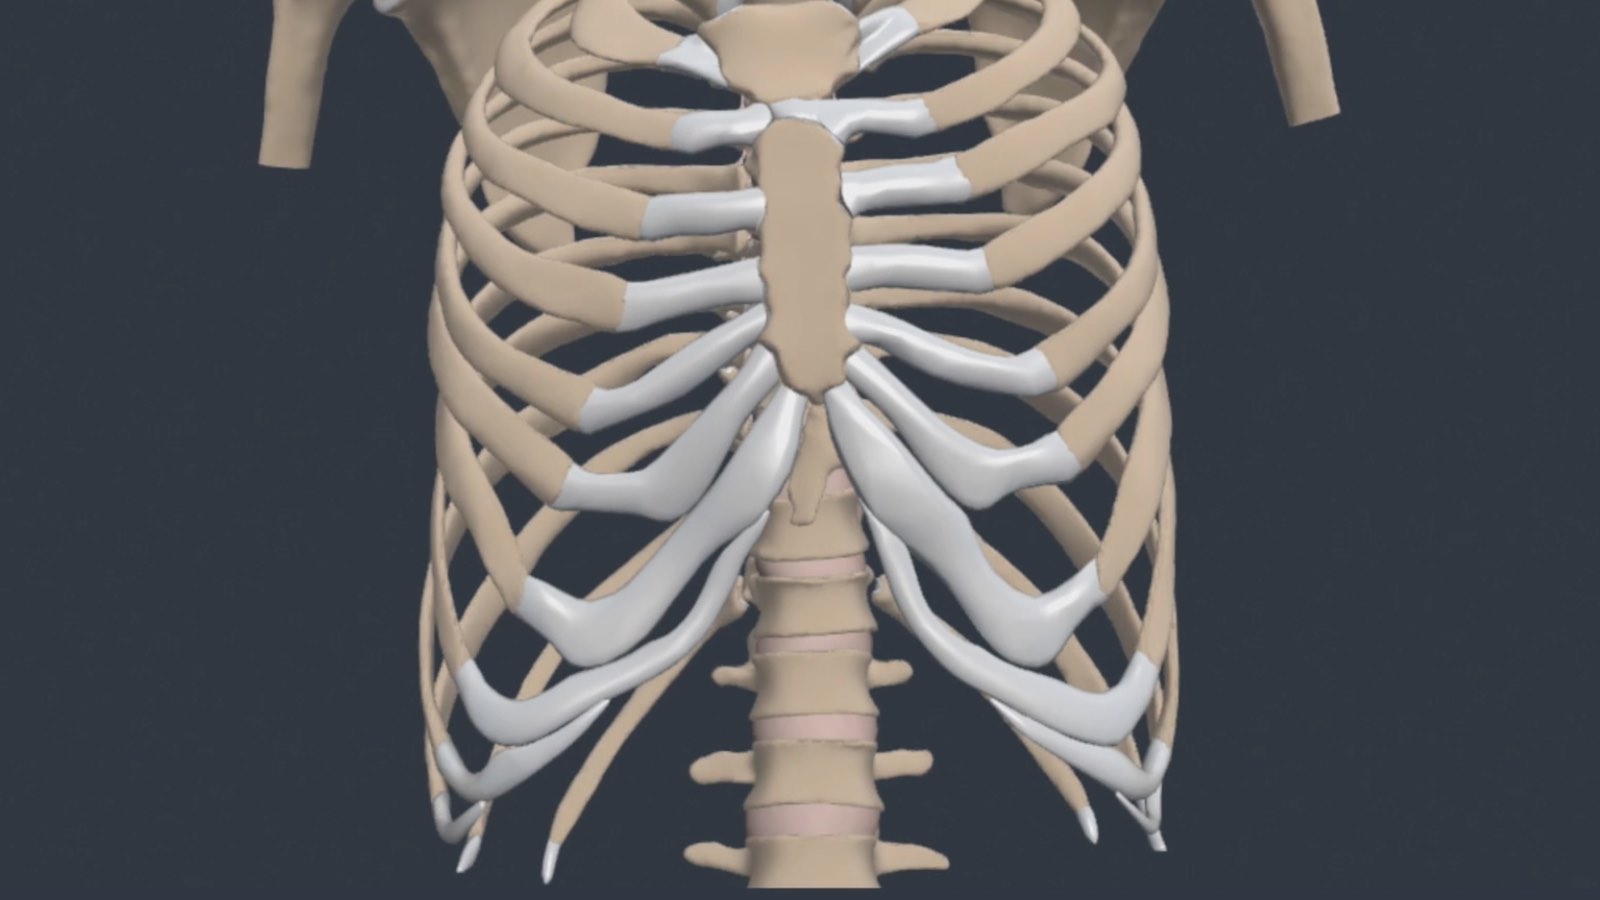 Exploring Thoracic Spine and Rib Cage Anatomy